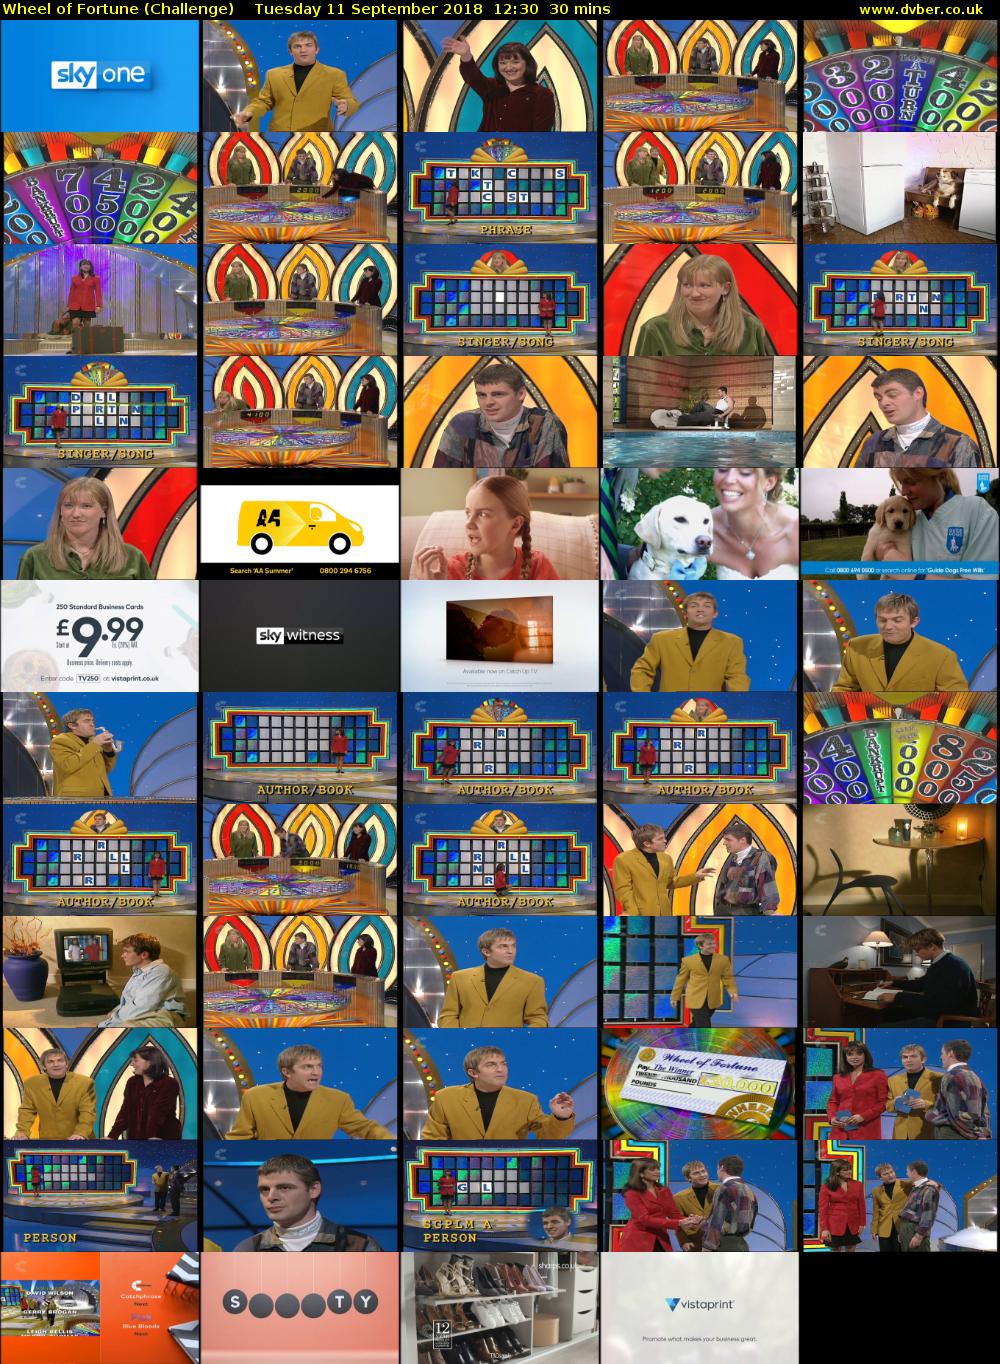 Wheel of Fortune (Challenge) Tuesday 11 September 2018 12:30 - 13:00